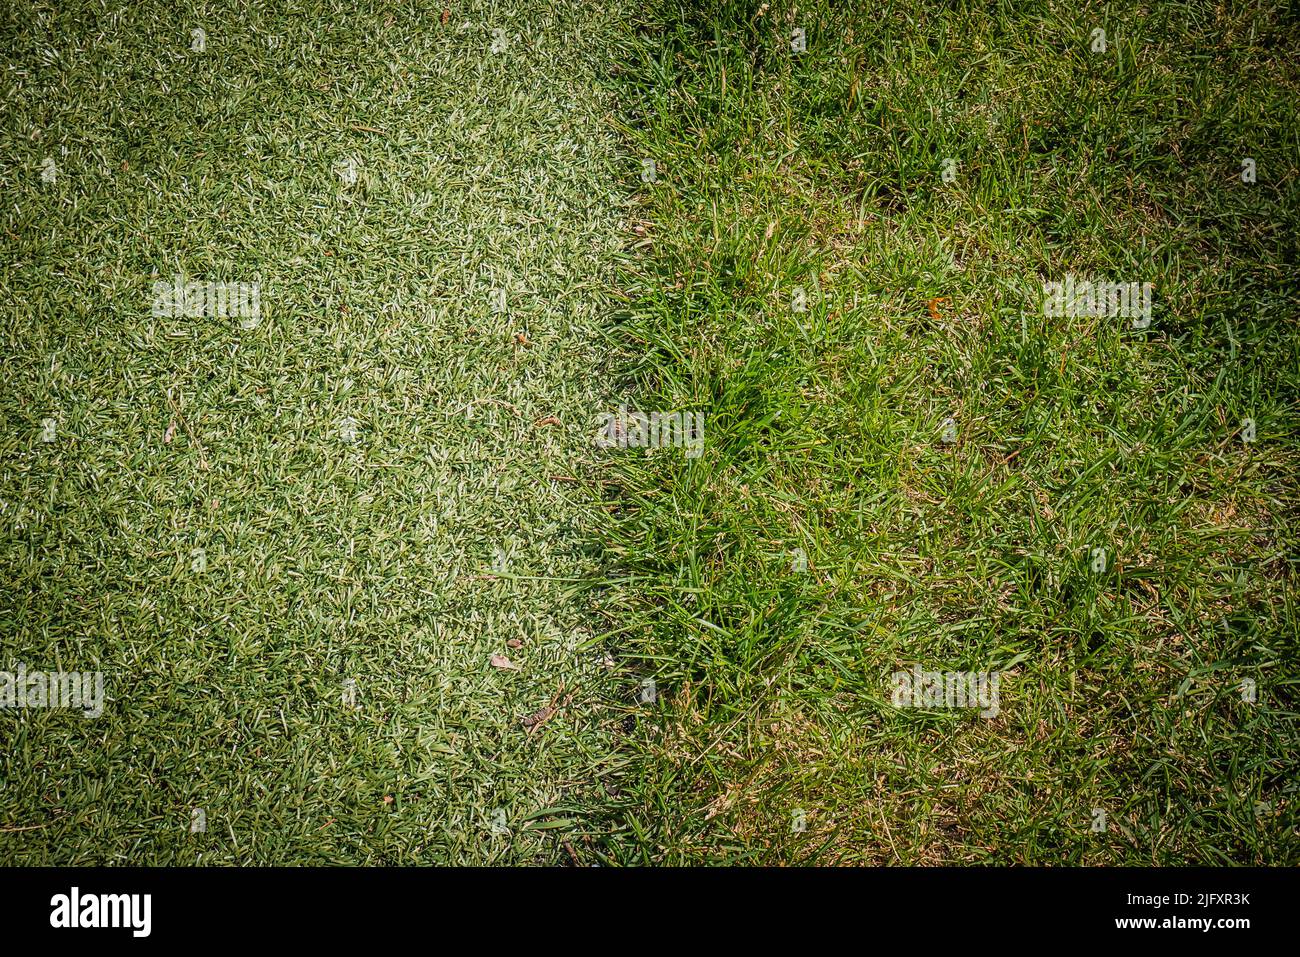 fake grass on the left and real grass on the right Stock Photo